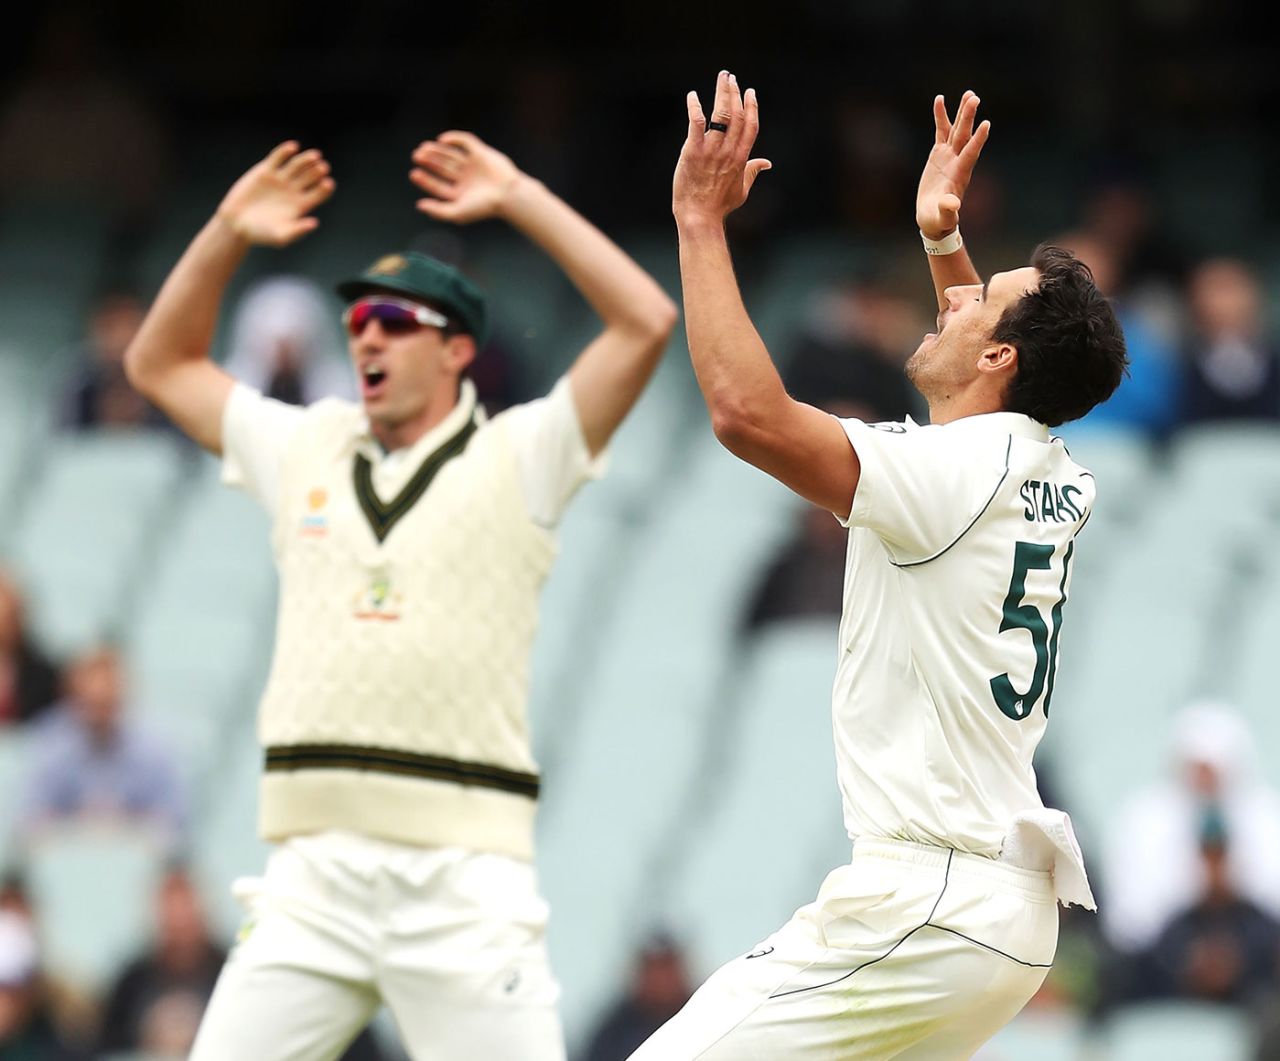 So close! Mitchell Starc reacts to his hat-trick ball, Australia v Pakistan, 2nd Test, Adelaide, December 1, 2019